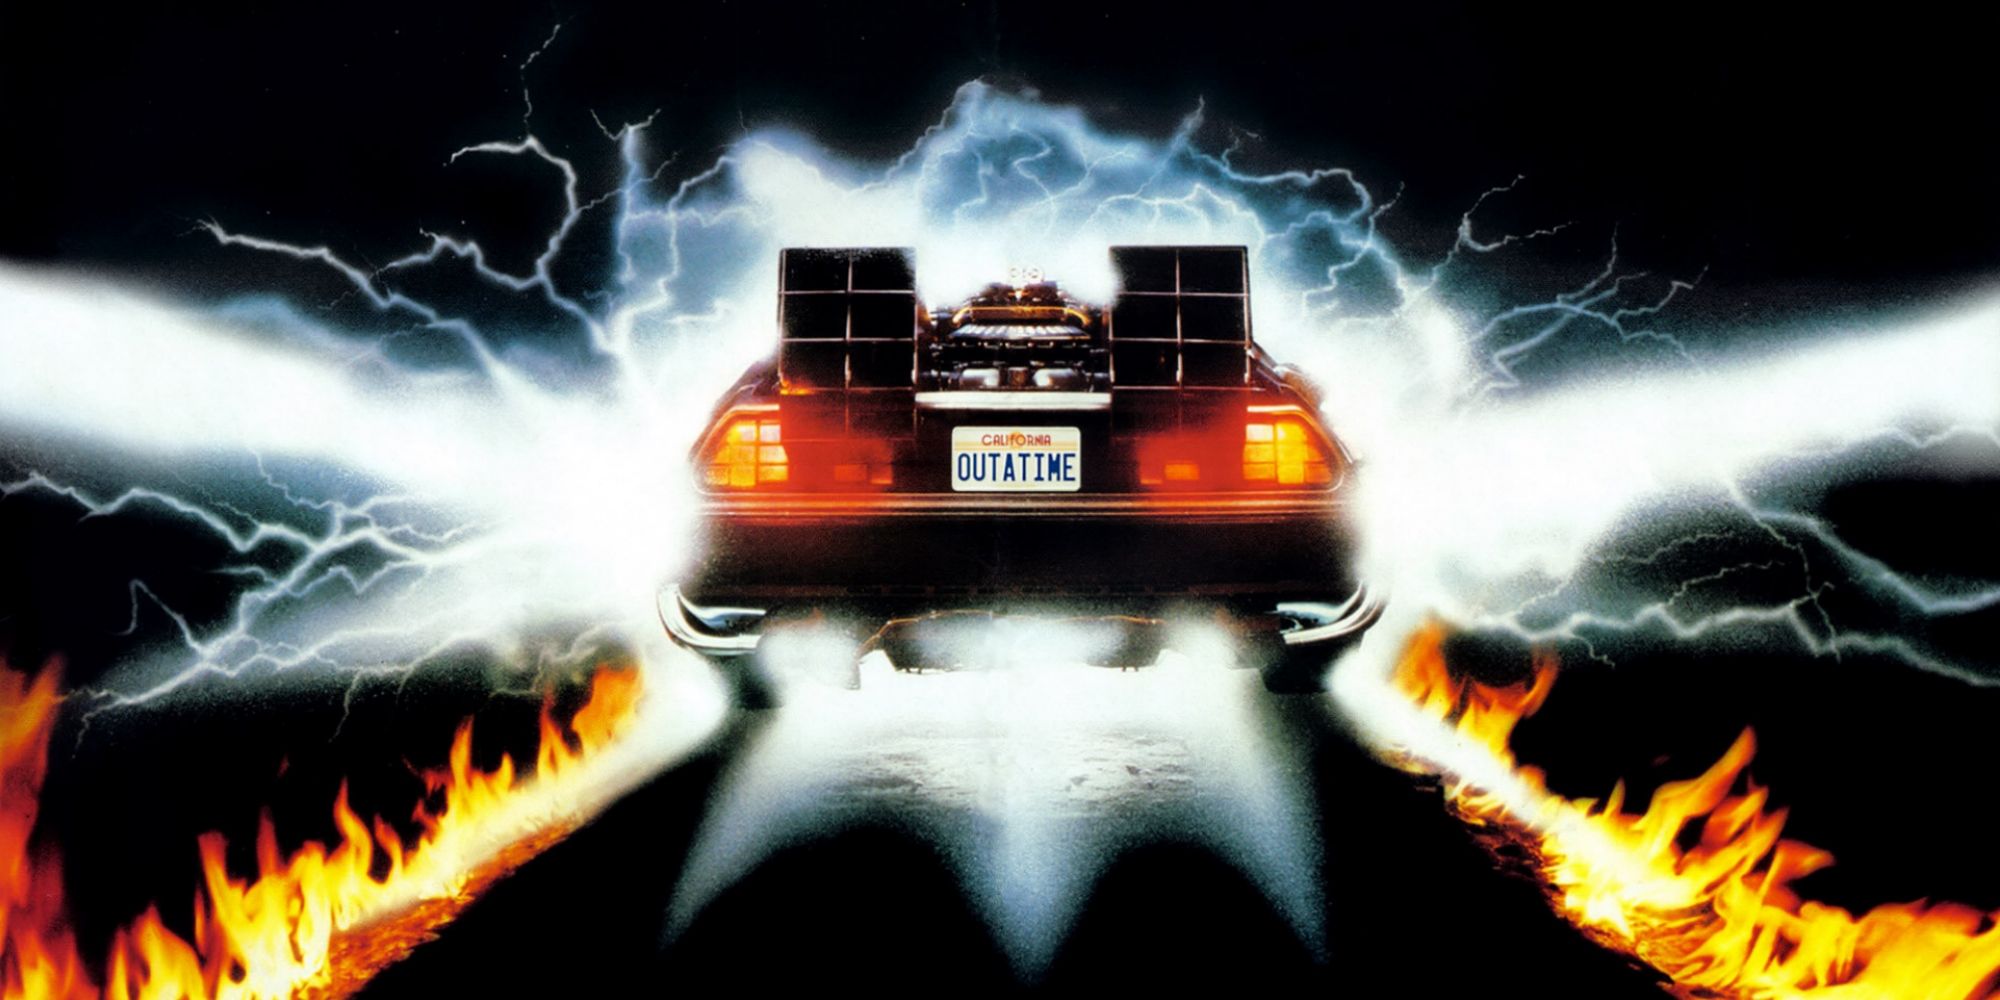 The fire trail of the Delorean time machine from 'Back to the Future'